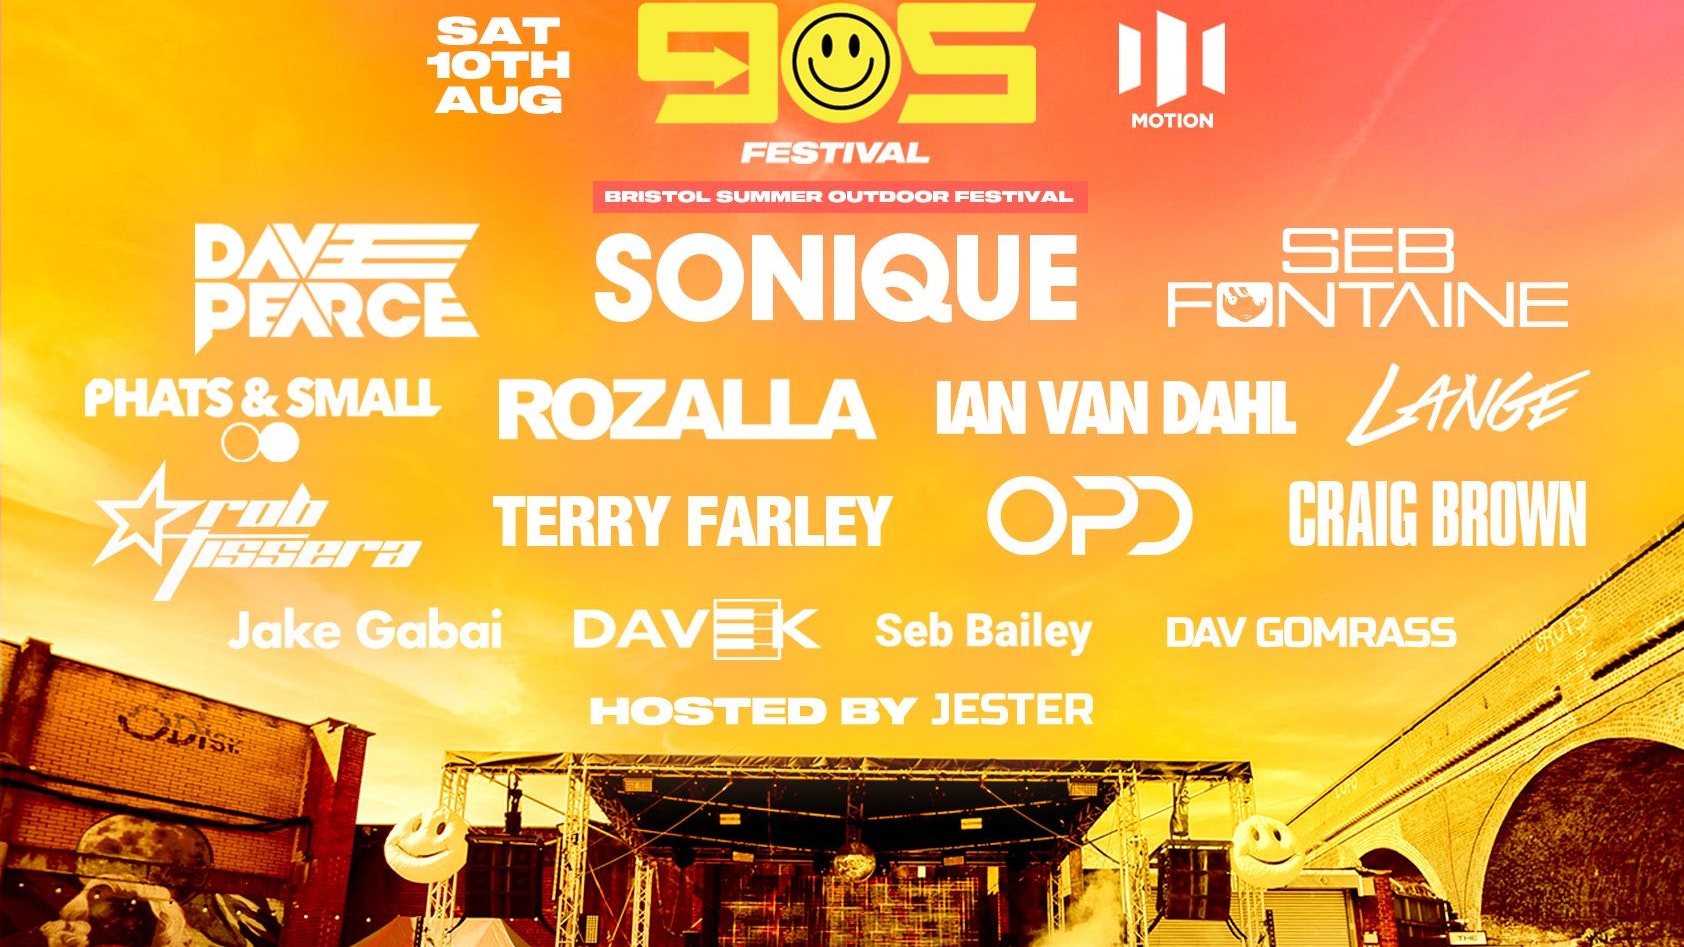 Back To The 90s – Summer Outdoor Festival – Motion [LIMITED TICKETS NOW ON SALE!]